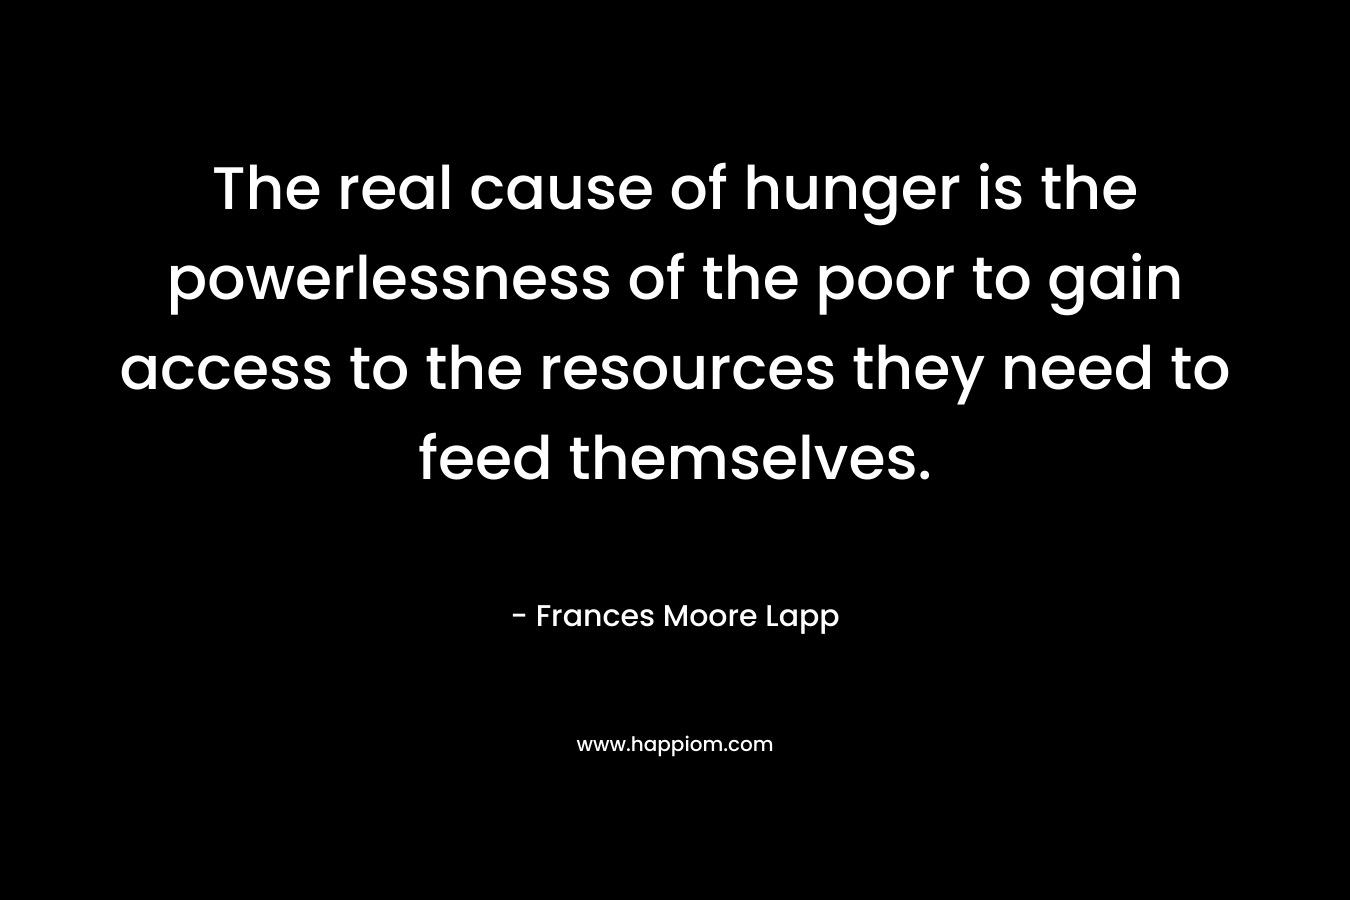 The real cause of hunger is the powerlessness of the poor to gain access to the resources they need to feed themselves.